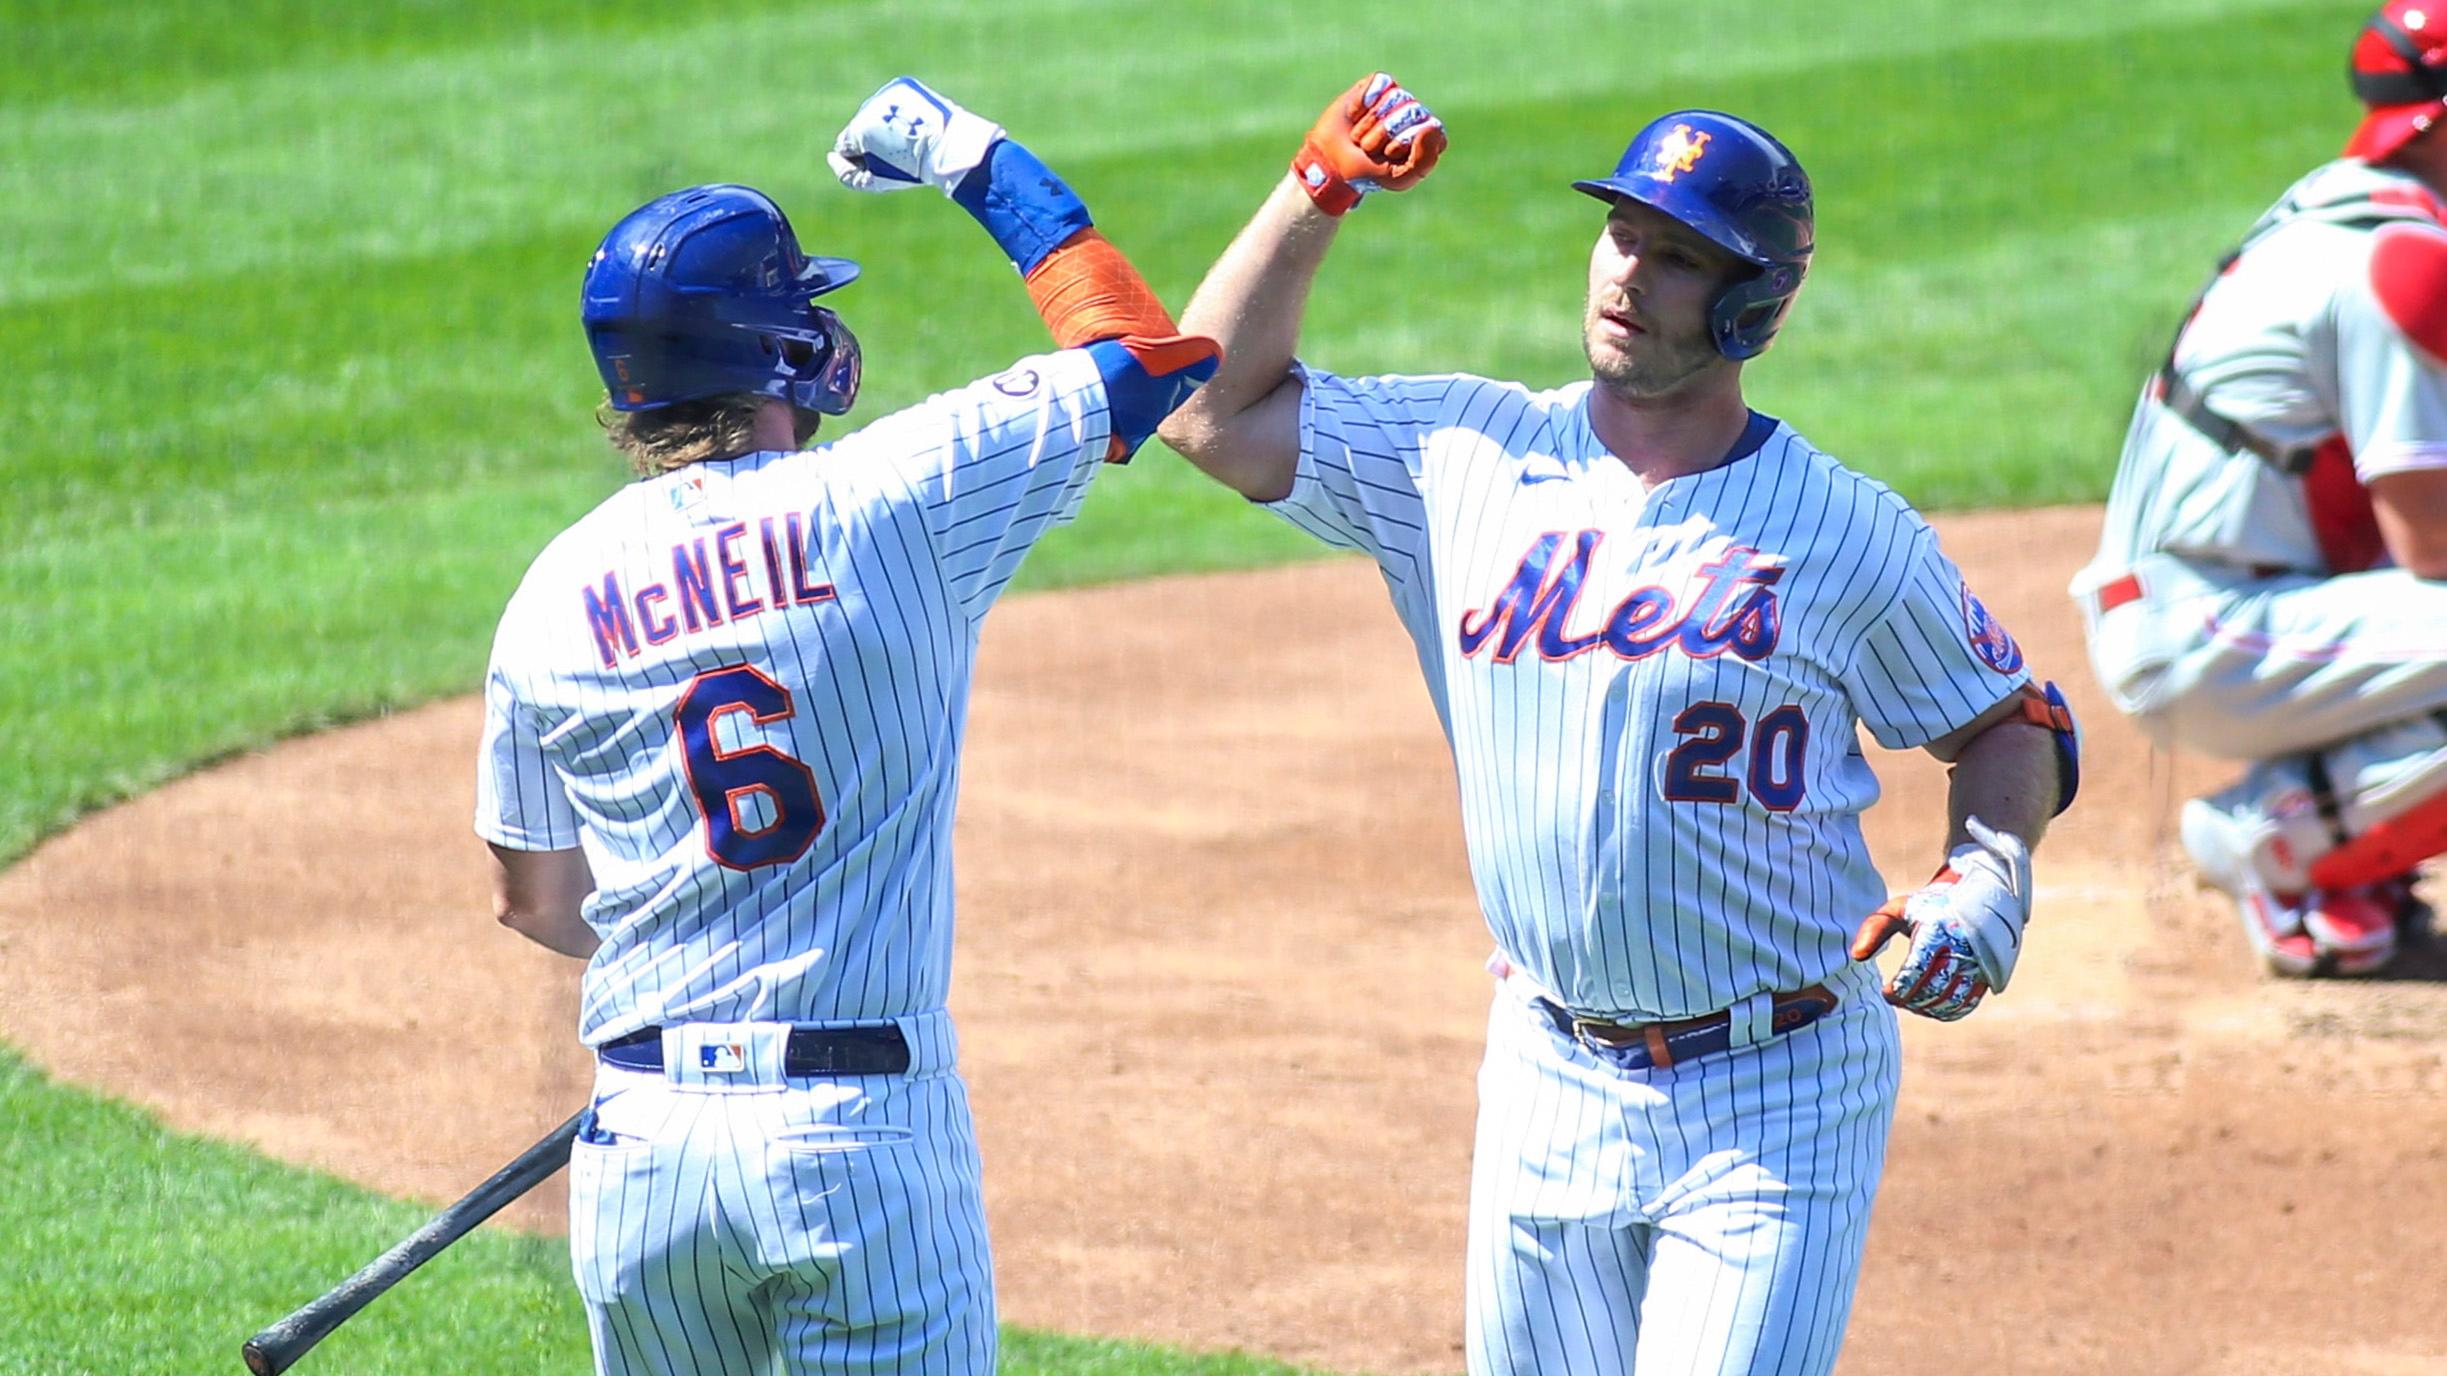 New York Mets designated hitter Pete Alonso (20) is greeted by left fielder Jeff McNeil (6) after hitting a solo home run in the second inning against the Philadelphia Phillies at Citi Field. / USA TODAY Sports